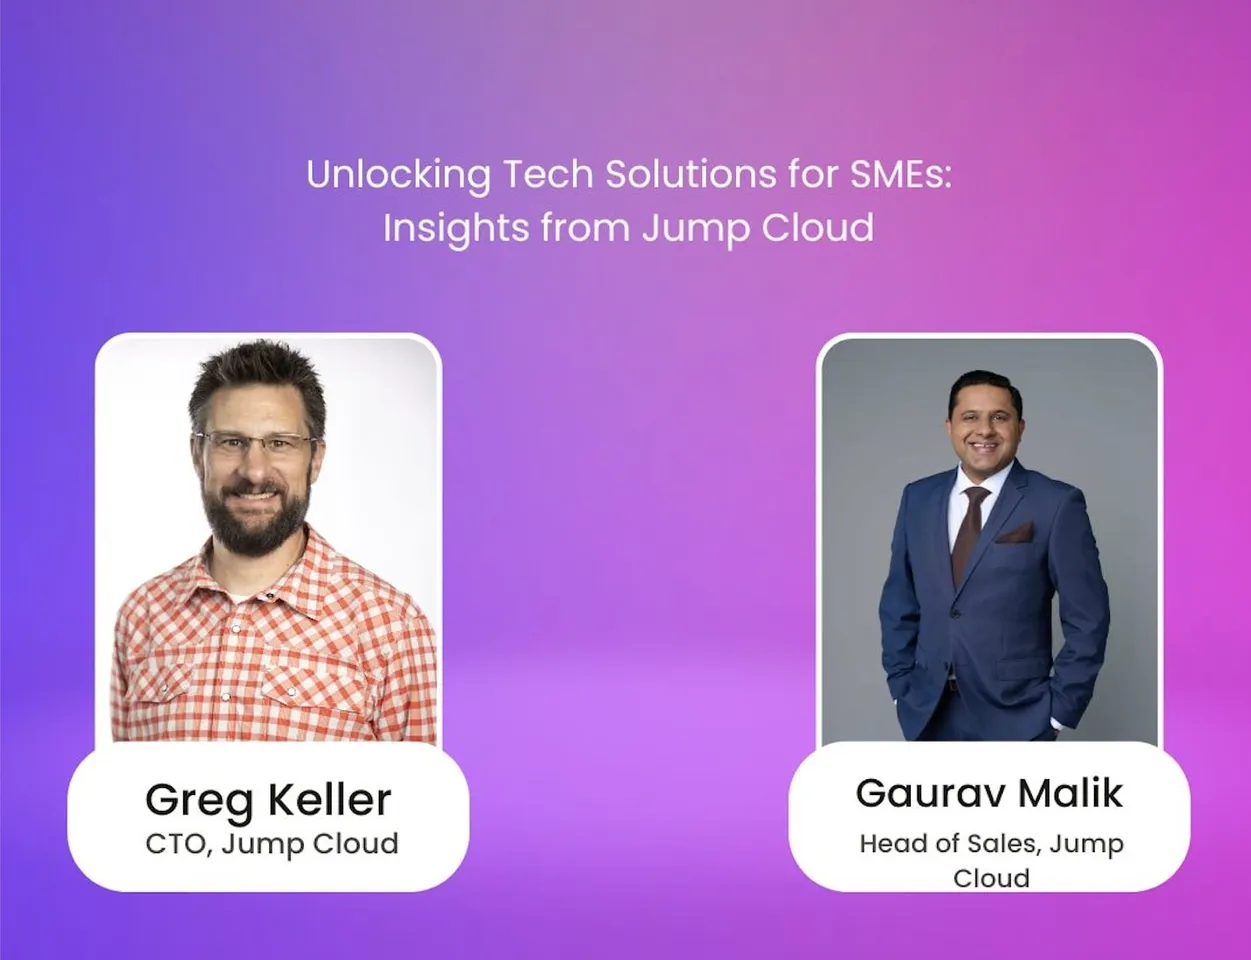 Unlocking Tech Solutions for SMEs: Insights from Jump Cloud